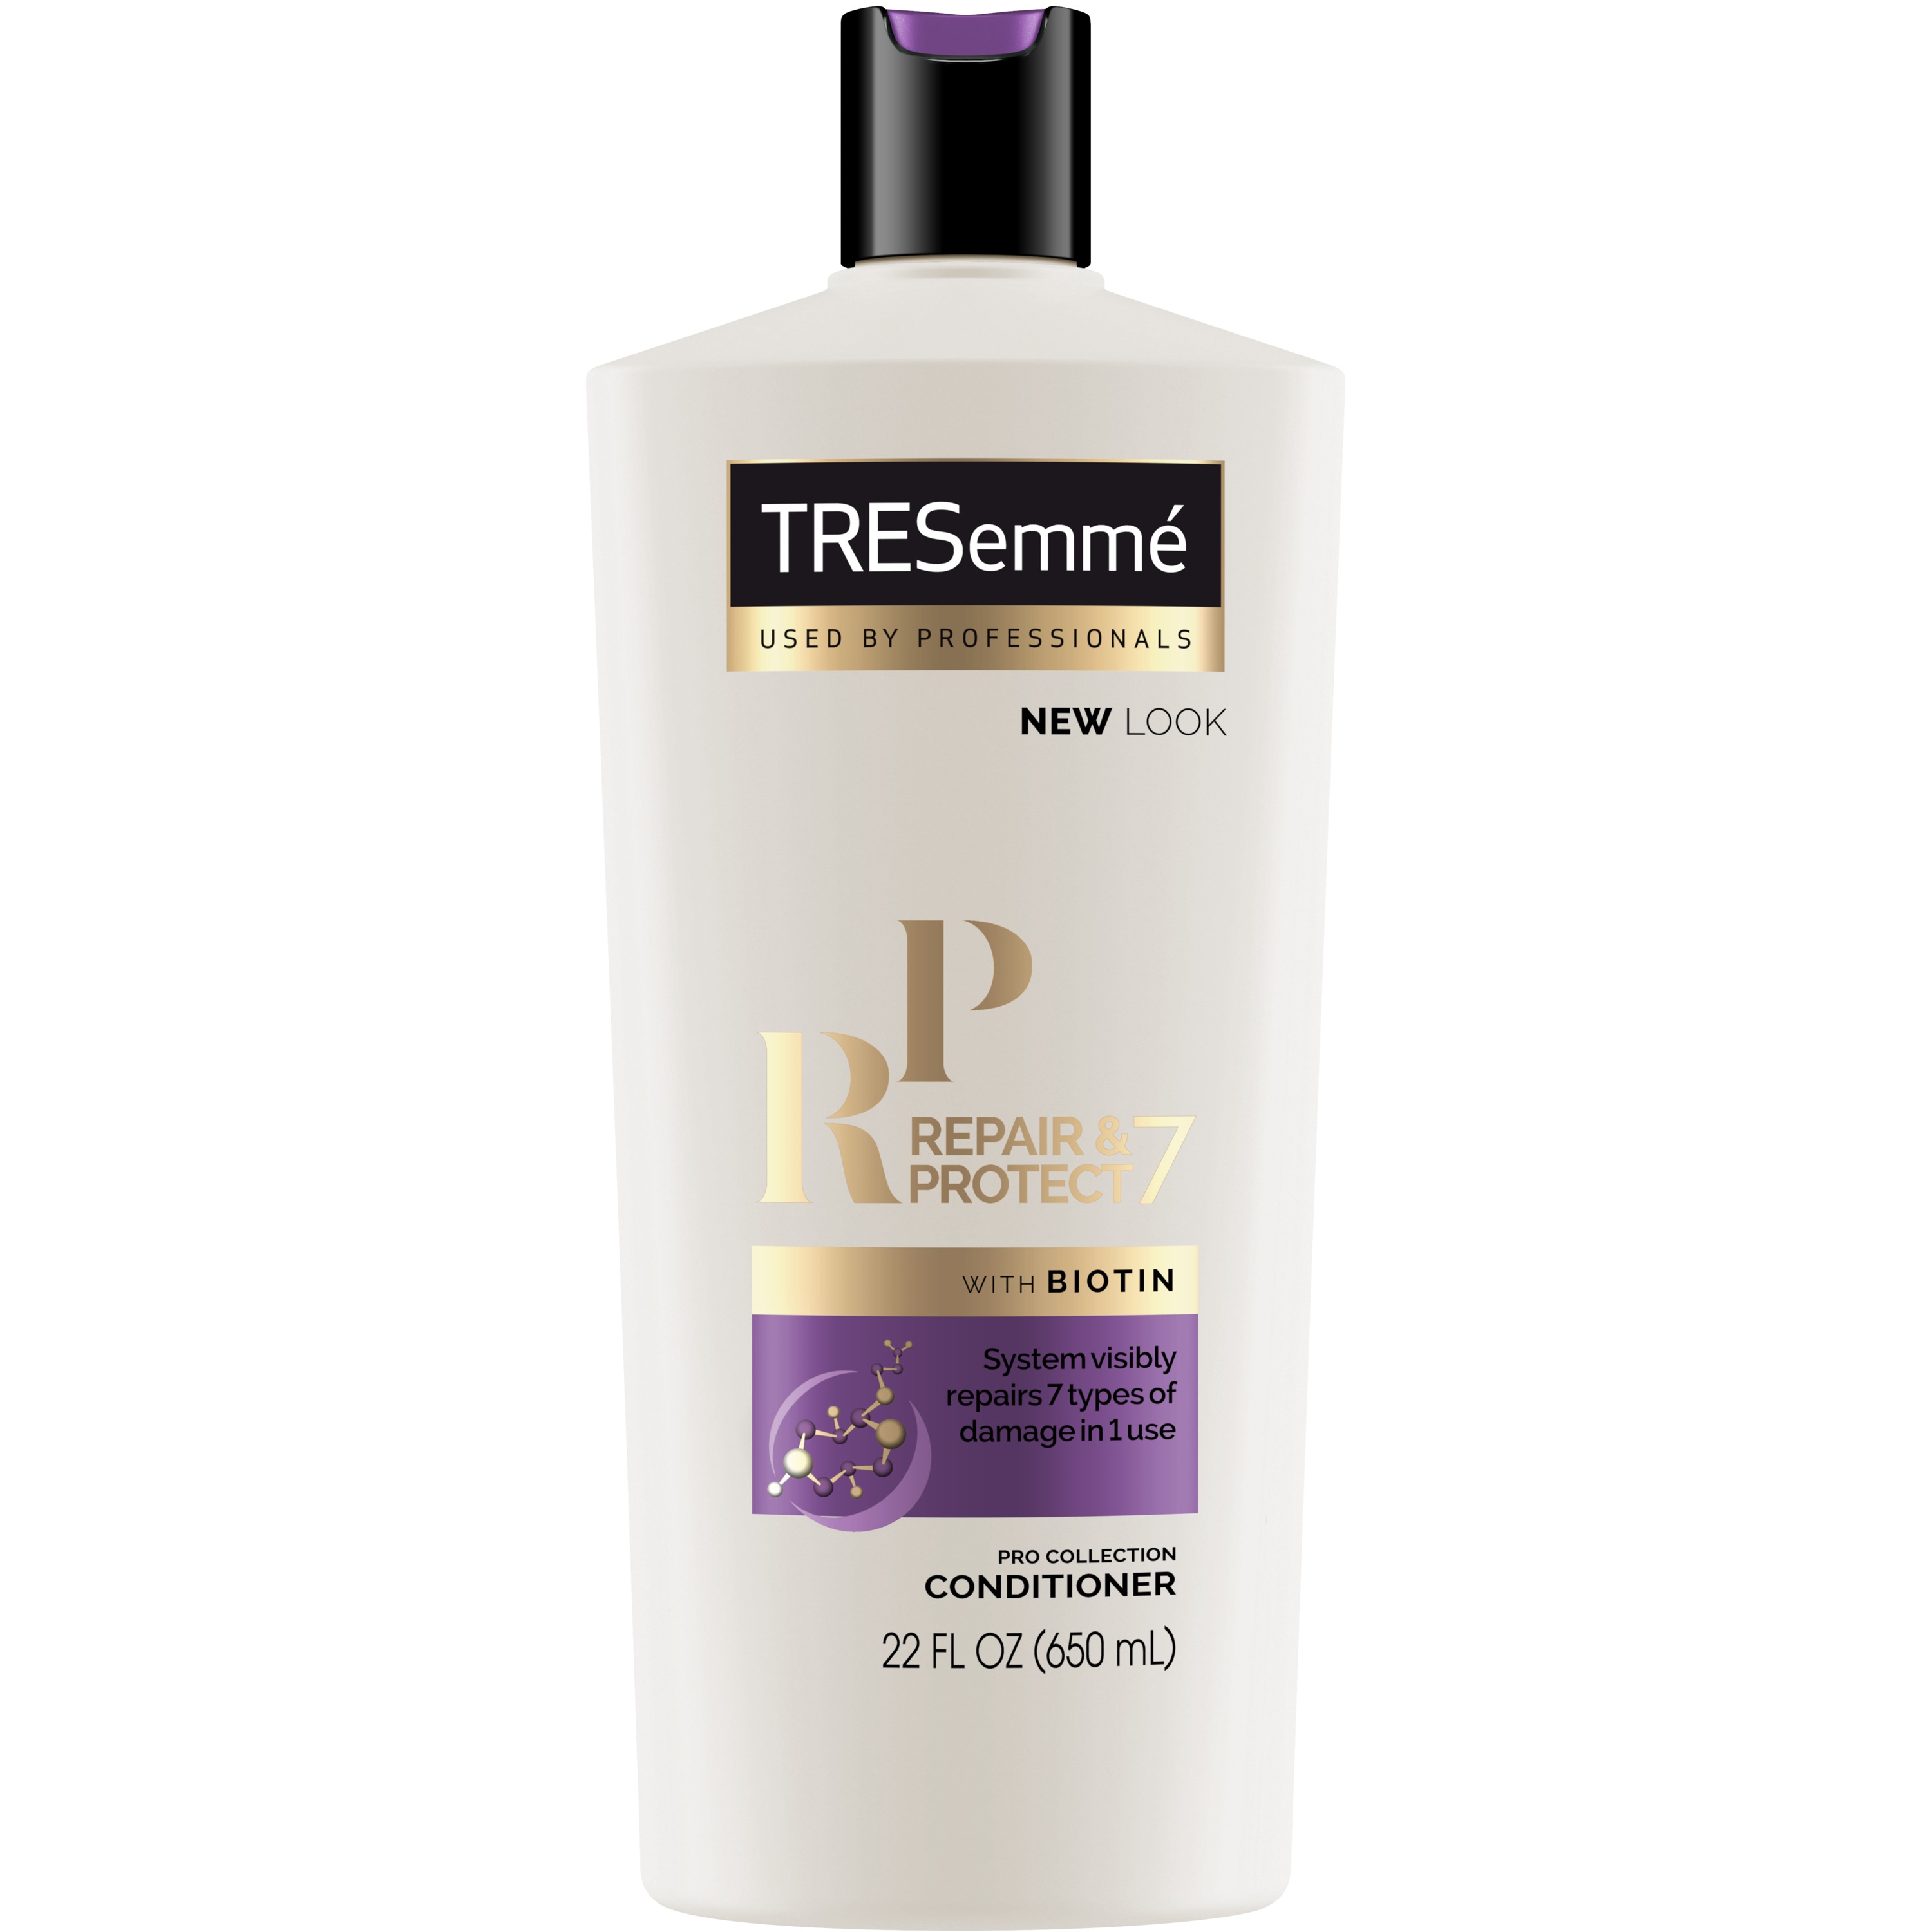 TRESemme 3-Pc Healthy & Protected Blowout Gift Set Repair and Protect with Hair Dryer (Shampoo, Conditioner) ($24.84 Value) - image 8 of 11